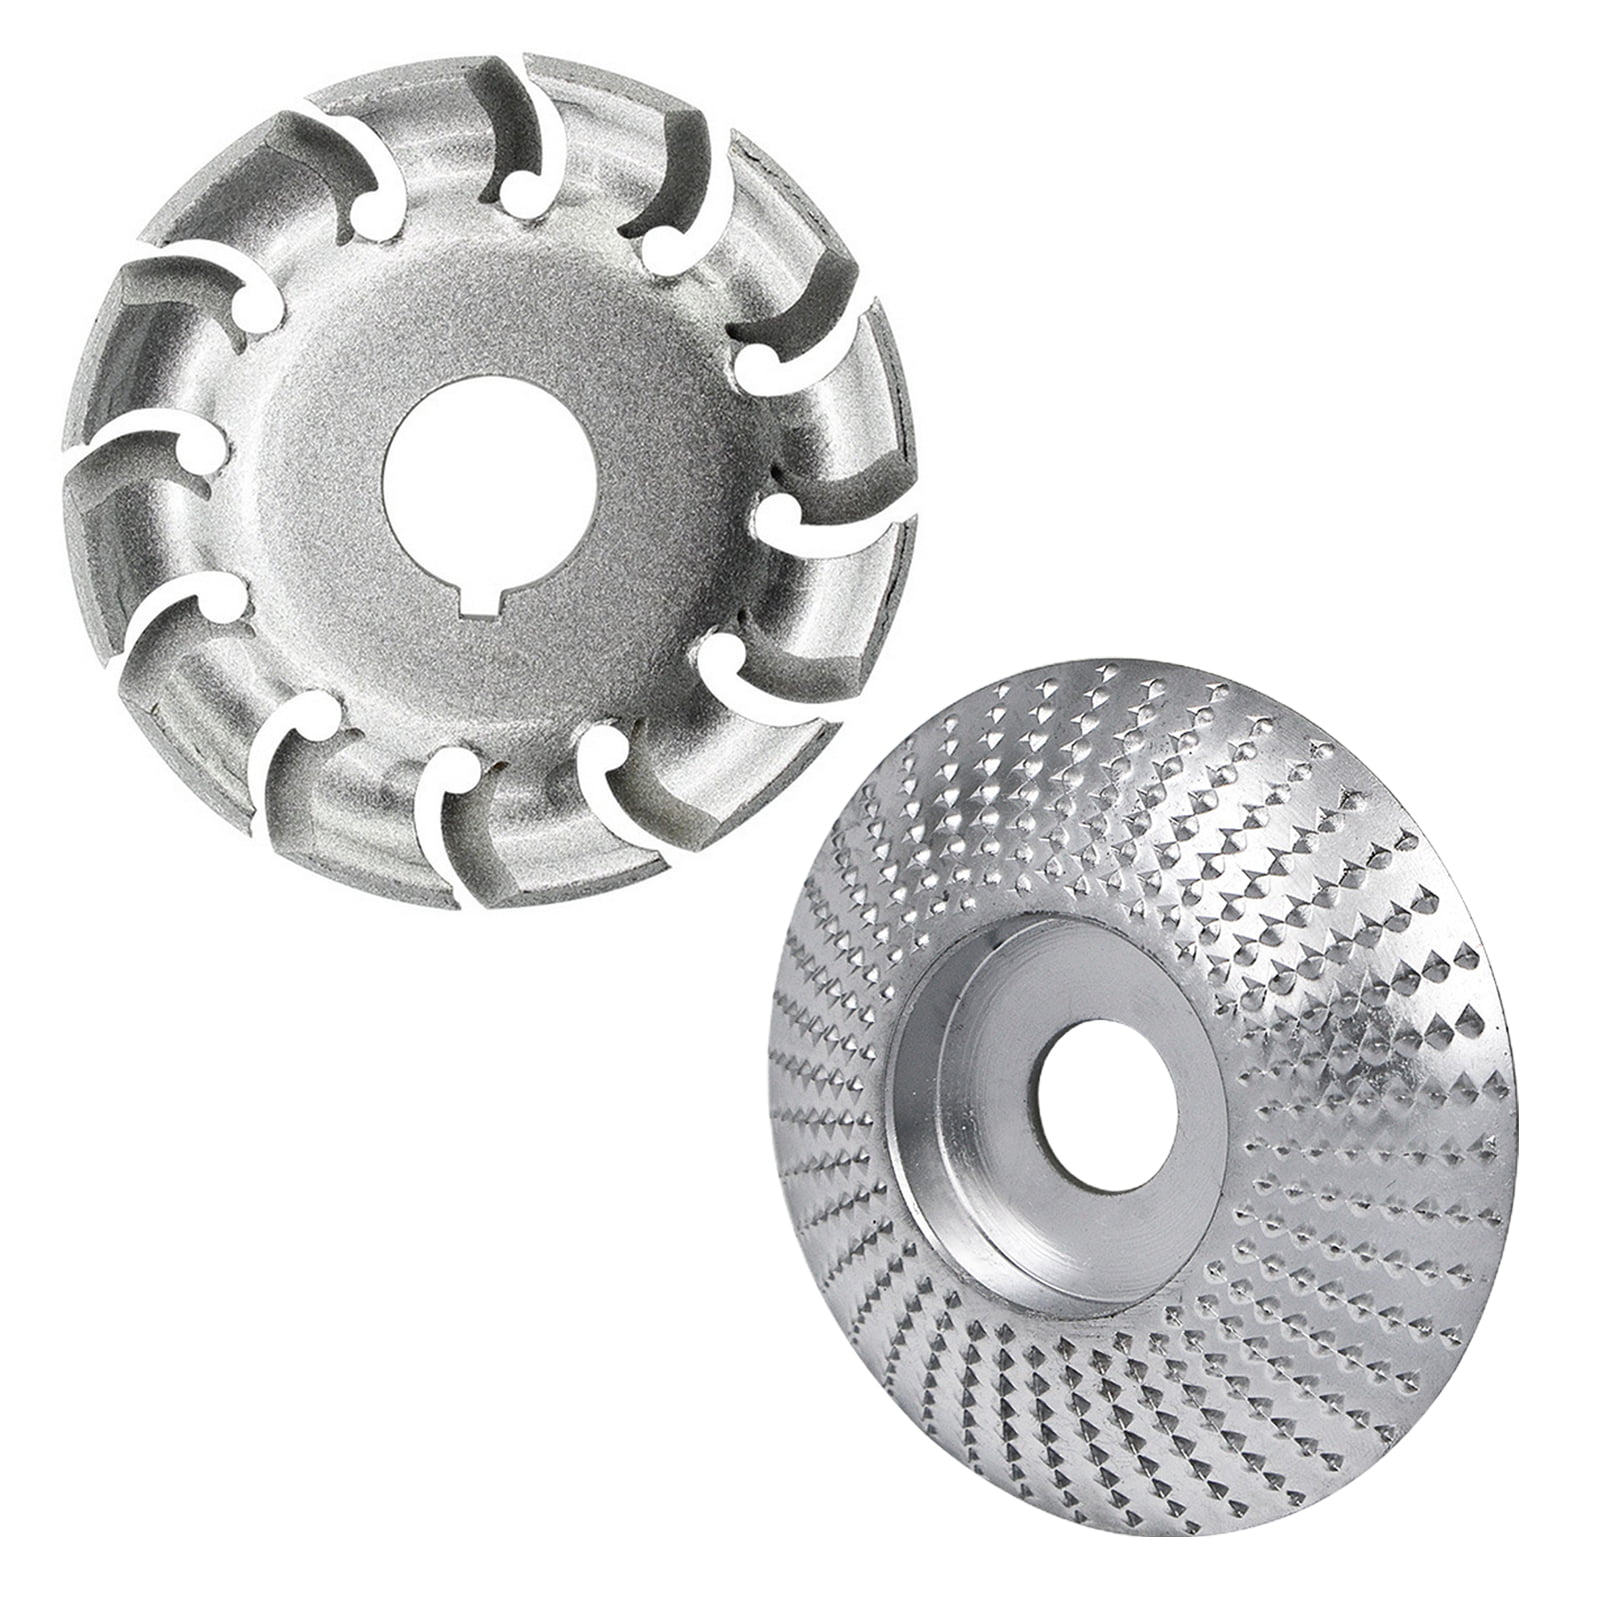 2 Pieces Angle Grinder Disc Wood Carving Disc Grinding Wheel Carving Abrasive Flap Disc 12 Teeth Wood Polishing Shaping Disc Cutting Wheel for Sanding Carving Shaping Polishing Grinding Wheel Plate